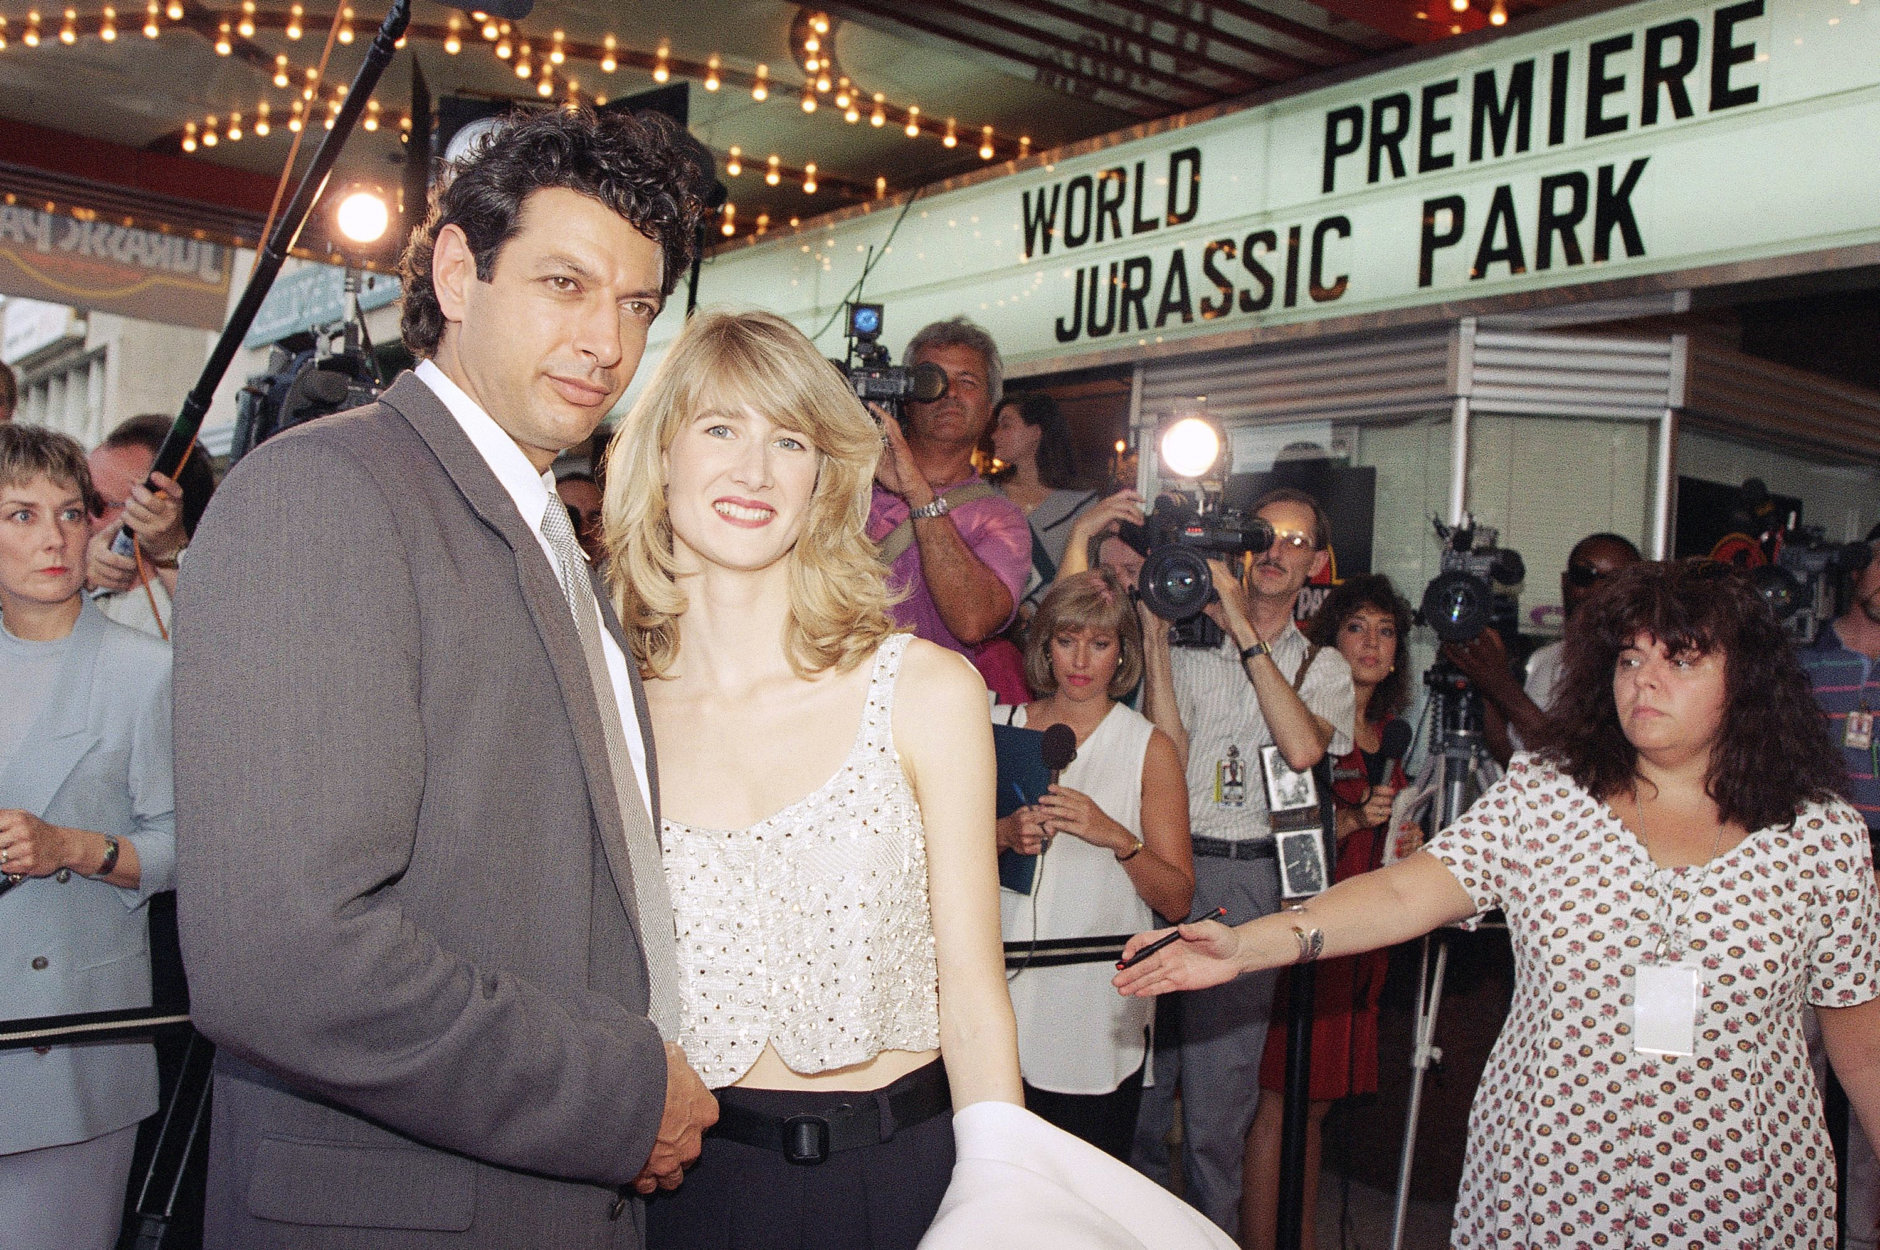 "Jurassic Park" co-stars Jeff Goldblum and Laura Dern appear at the premiere of the Steven Spielberg-directed dinosaur thriller in Washington, June 9, 1993. The opening was a benefit for the children's defense fund. (AP Photo/Joe Marquette)